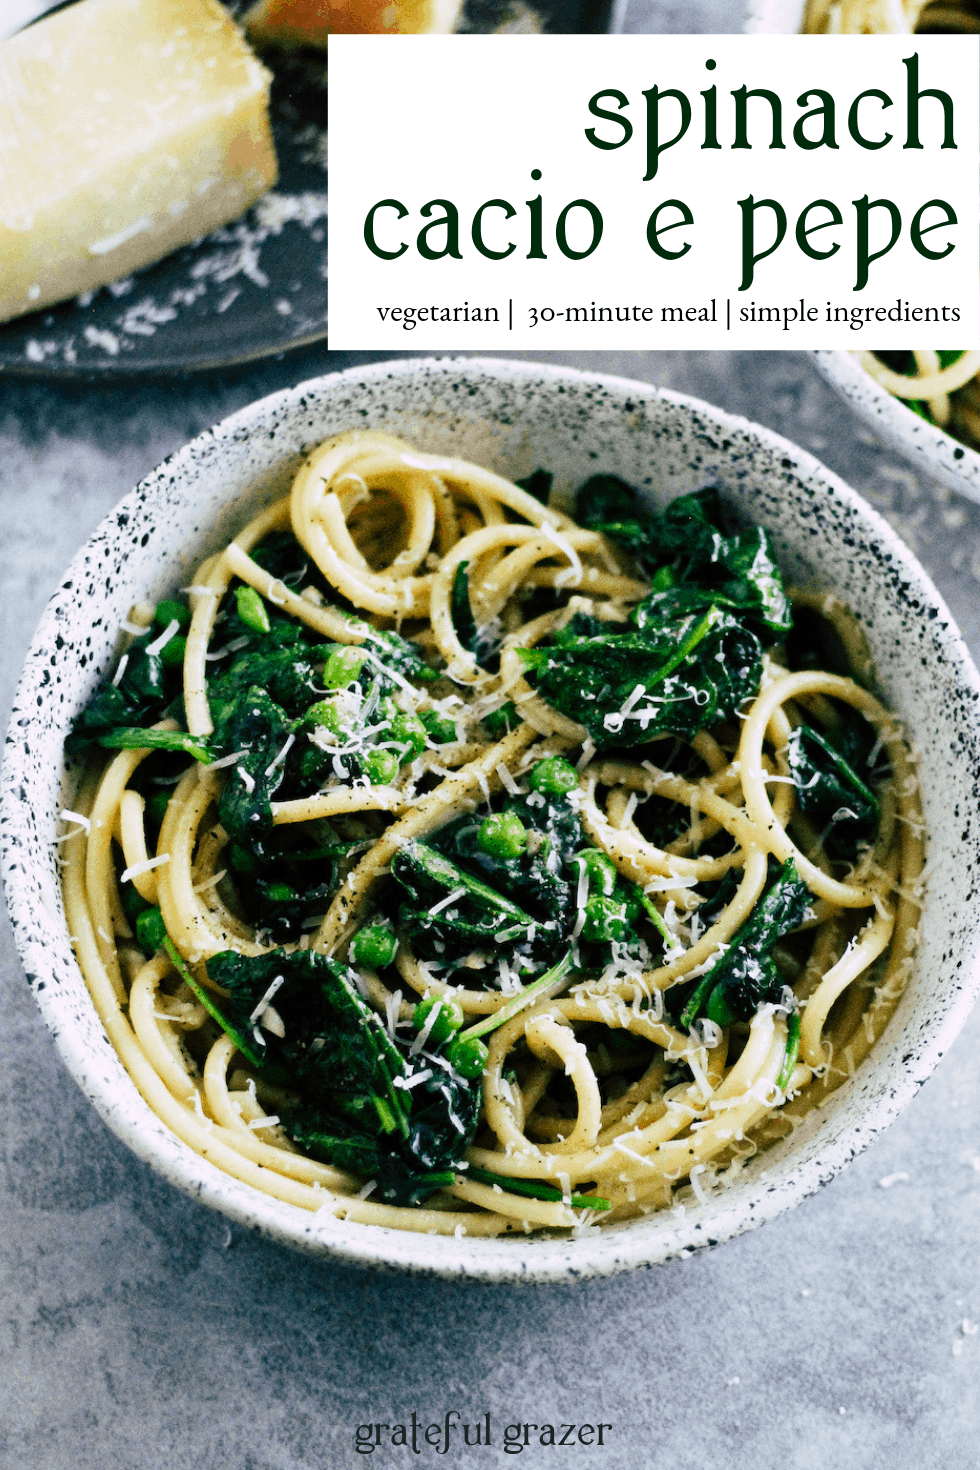 Bowl of pasta with spinach and peas. Title text reads, "Spinach Cacio e Pepe" vegetarian, 30-minute meal, simple ingredients."